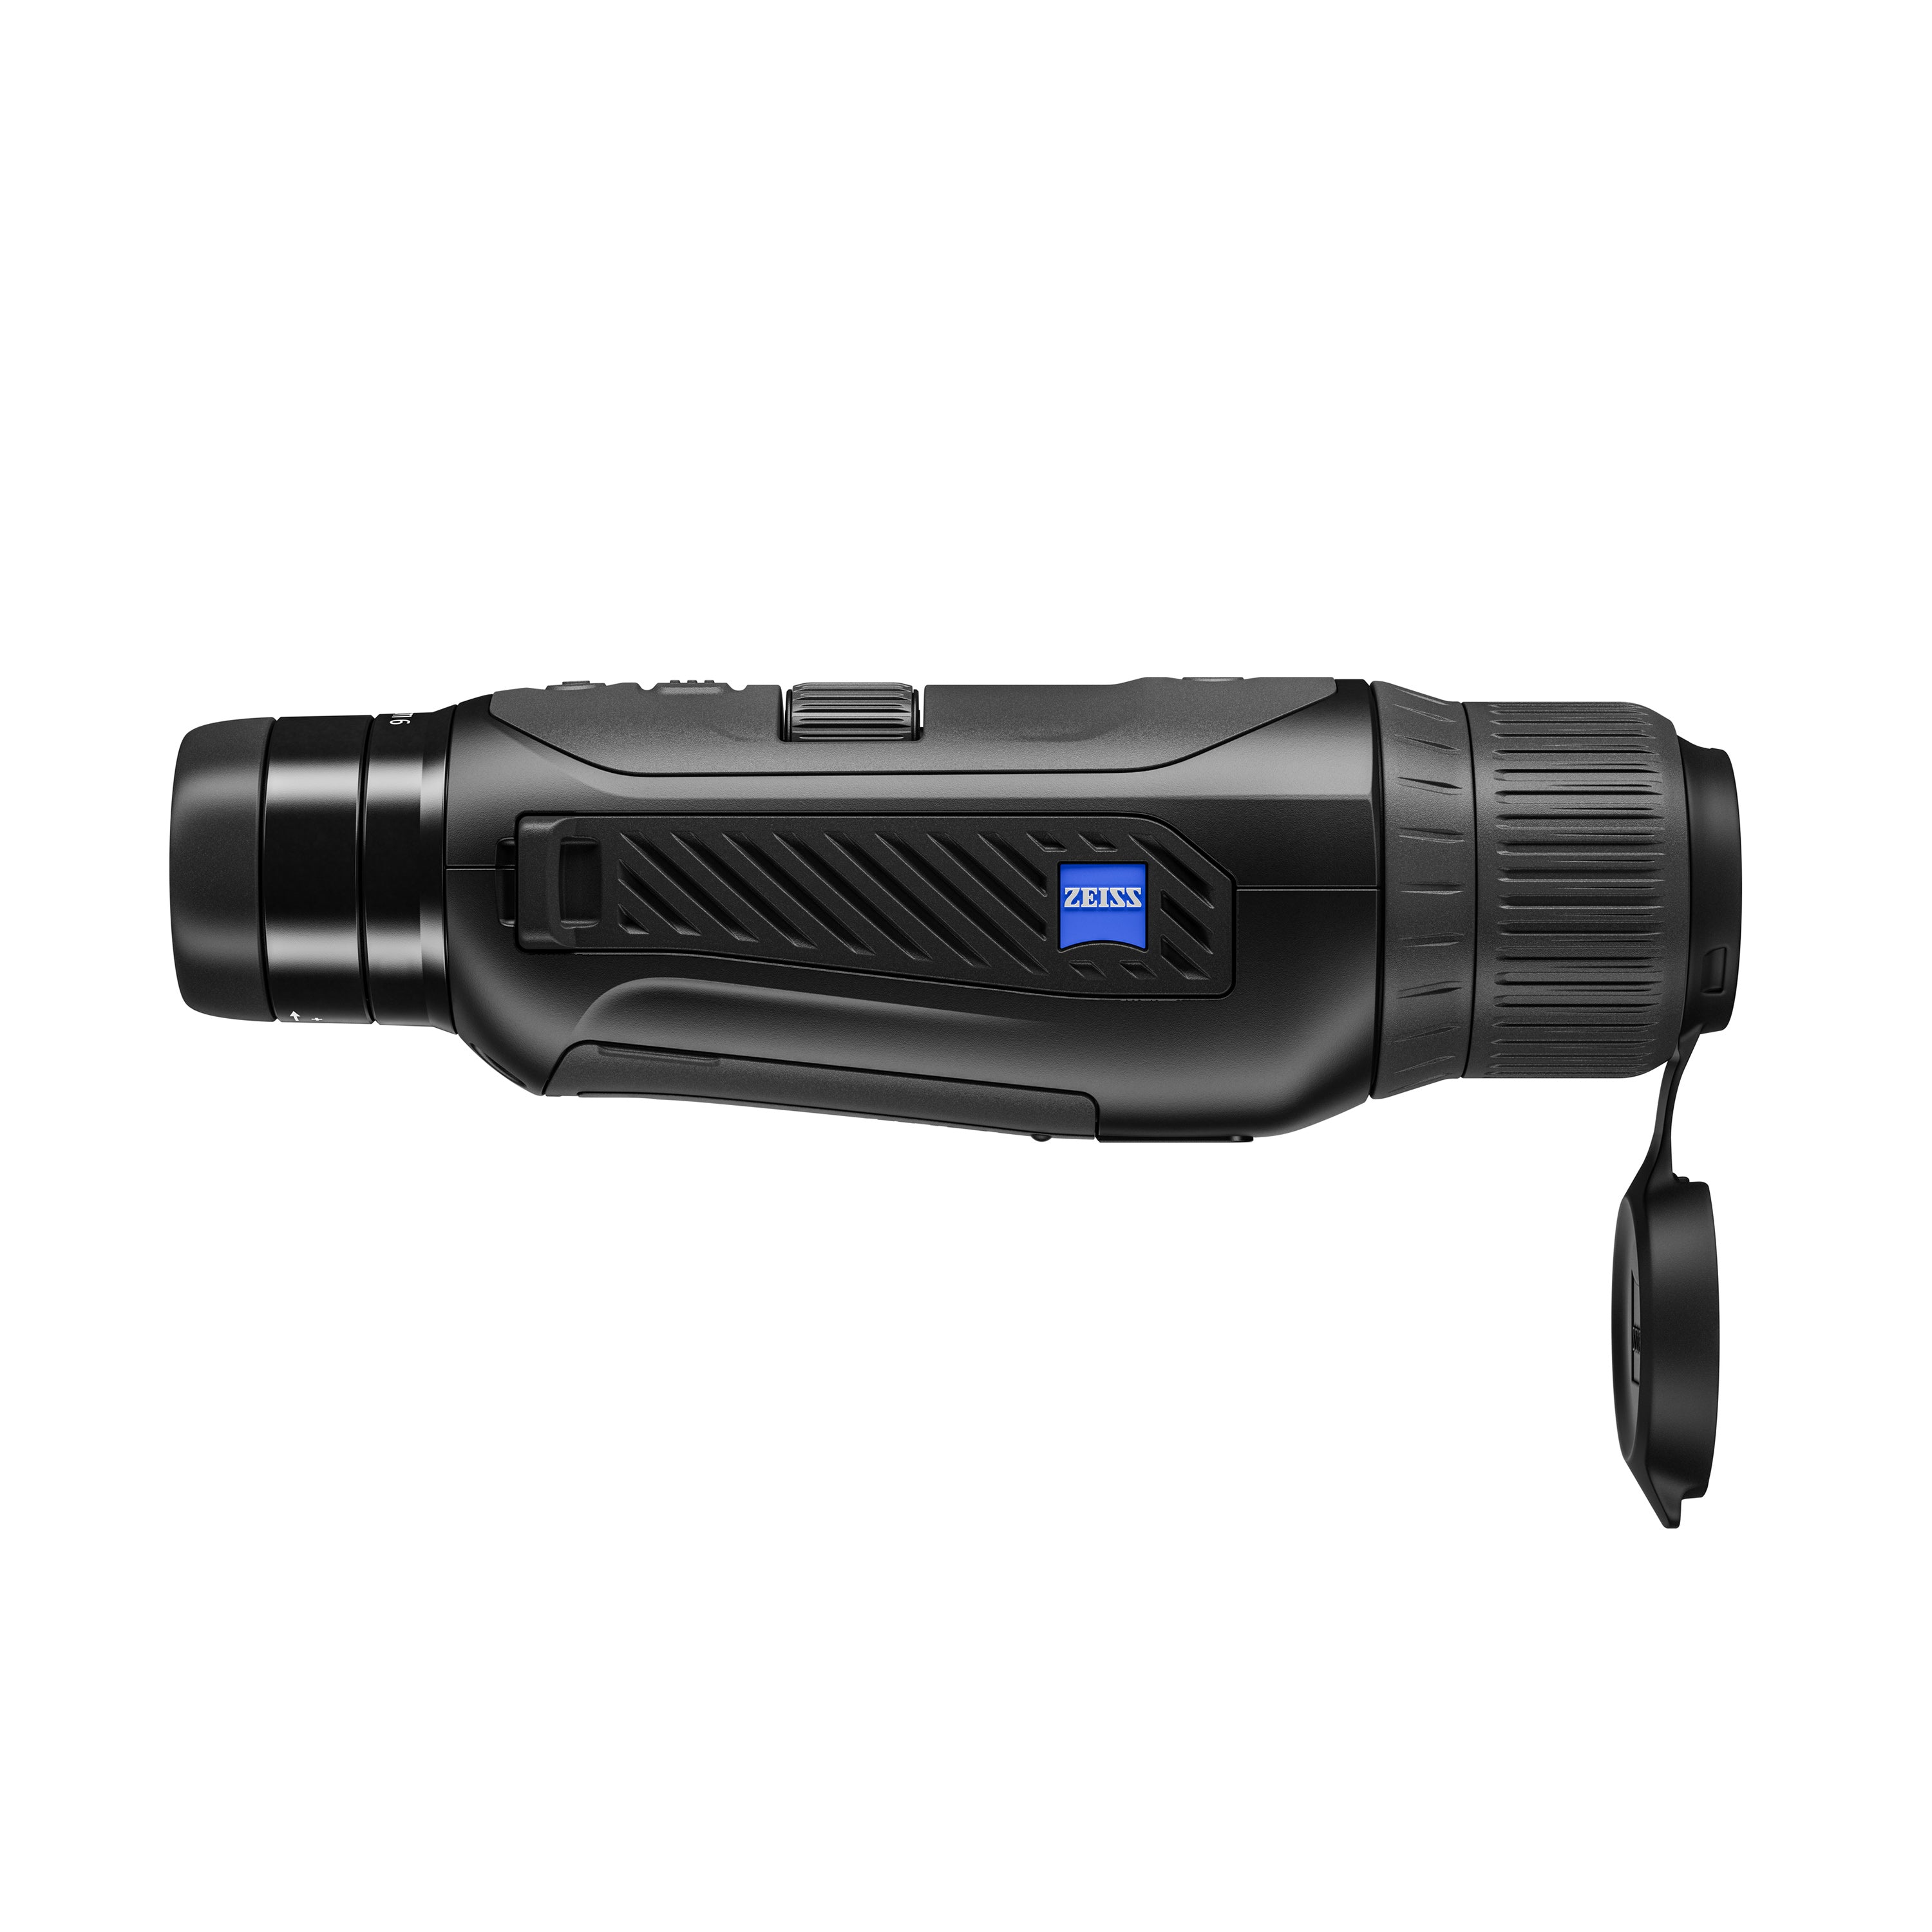 ZEISS DTI 6 Thermal Imaging Camera High-Resolution Monocular for Hunting and Wildlife Observation